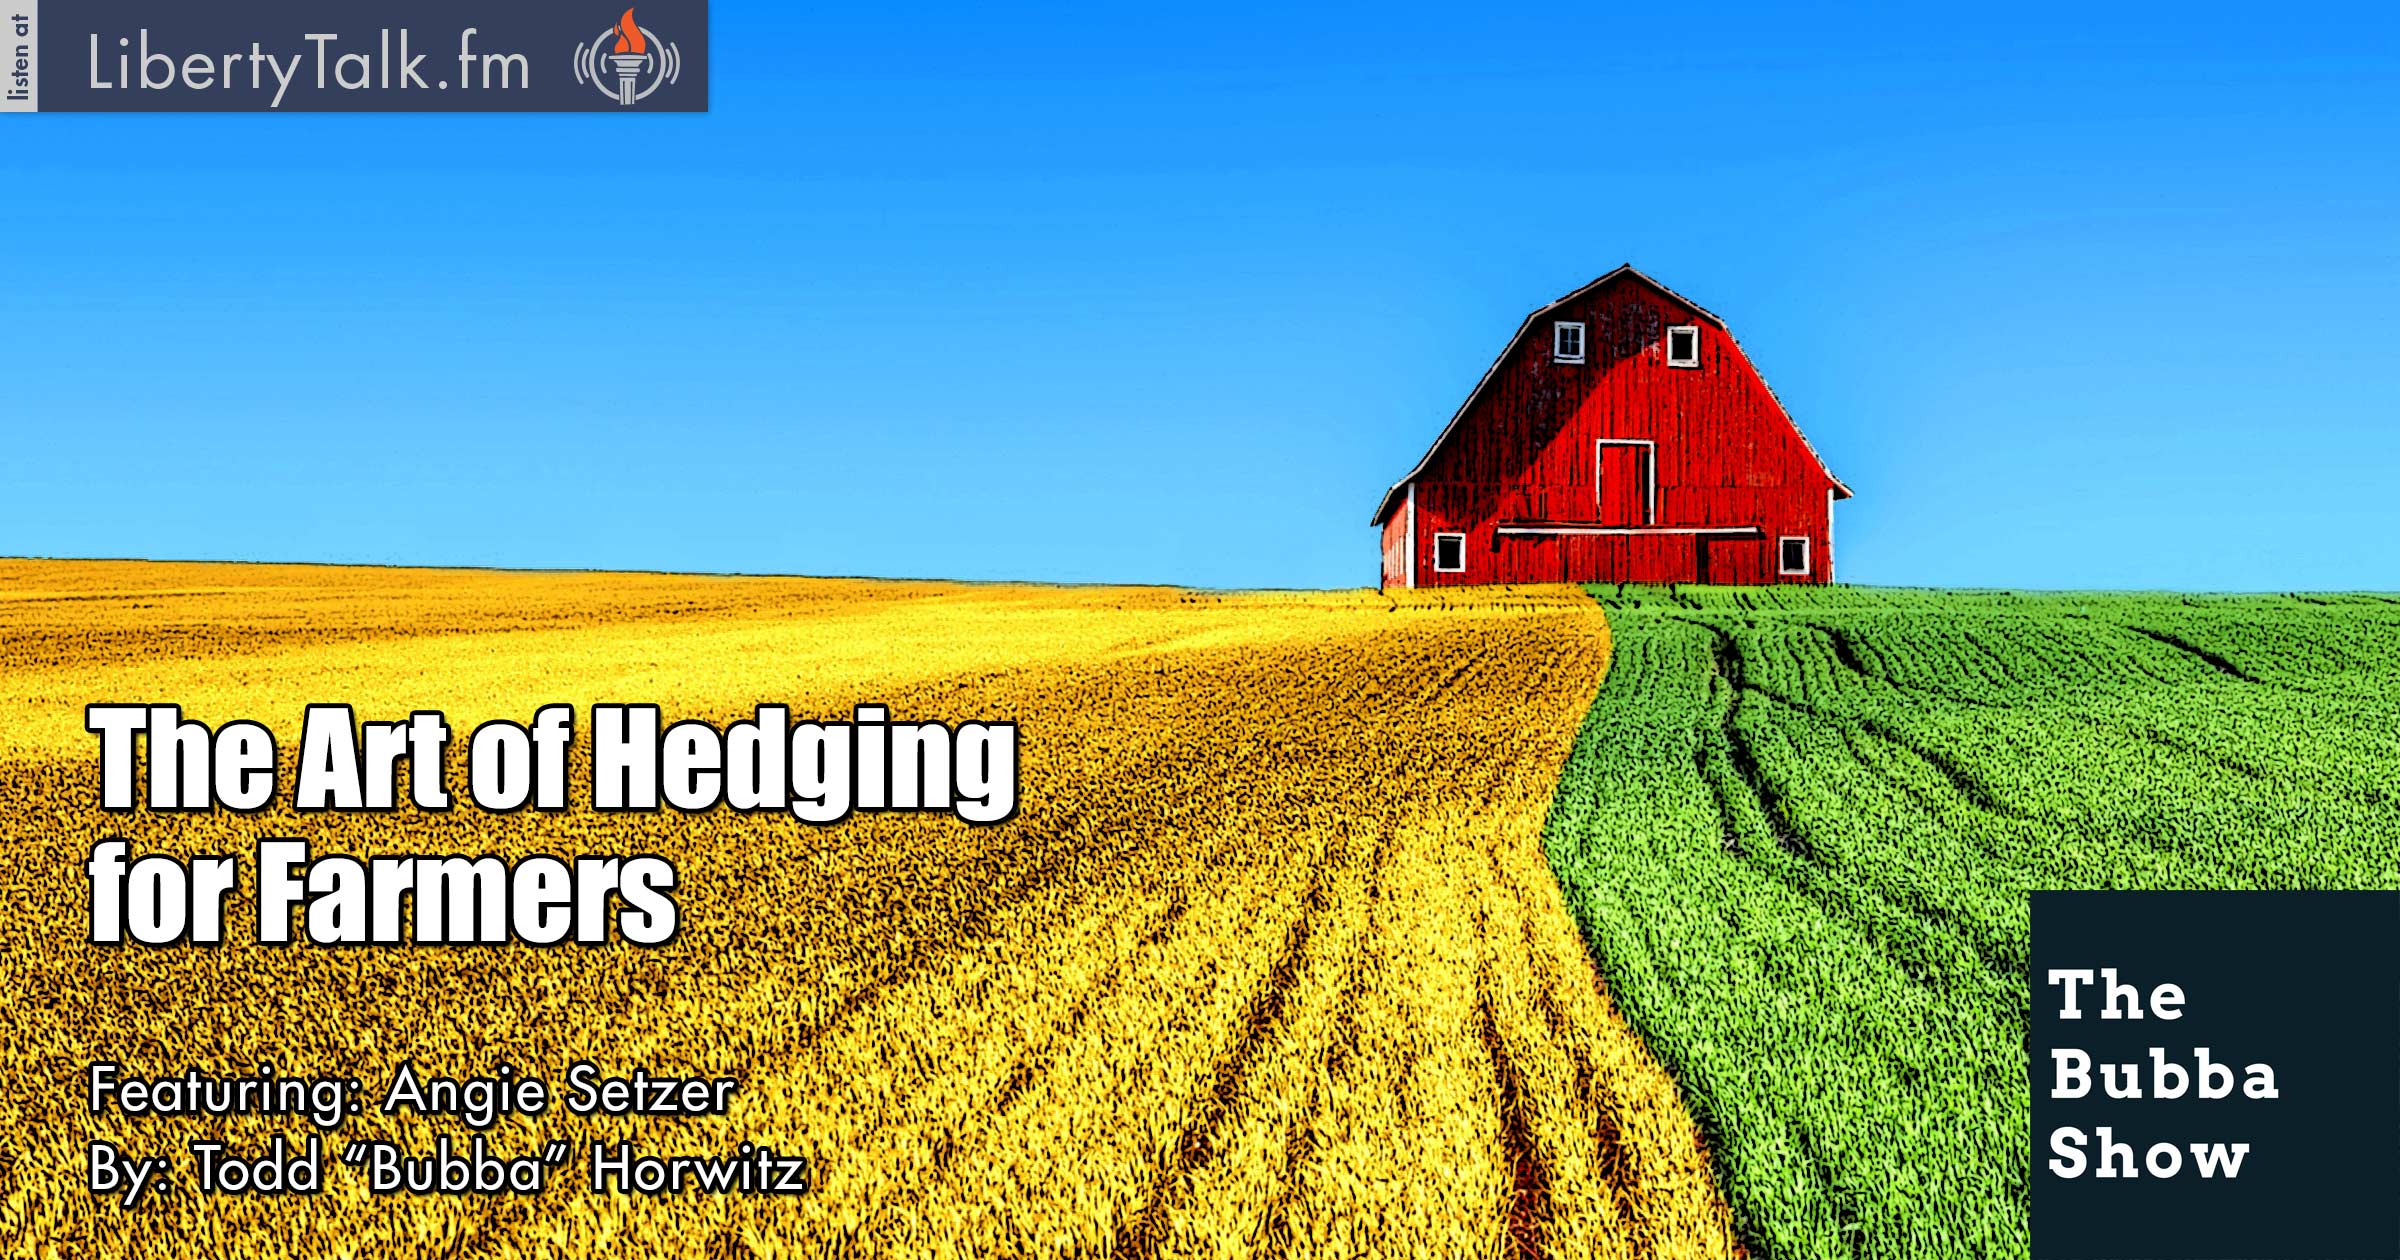 The Art of Hedging for Farmers - The Bubba Show